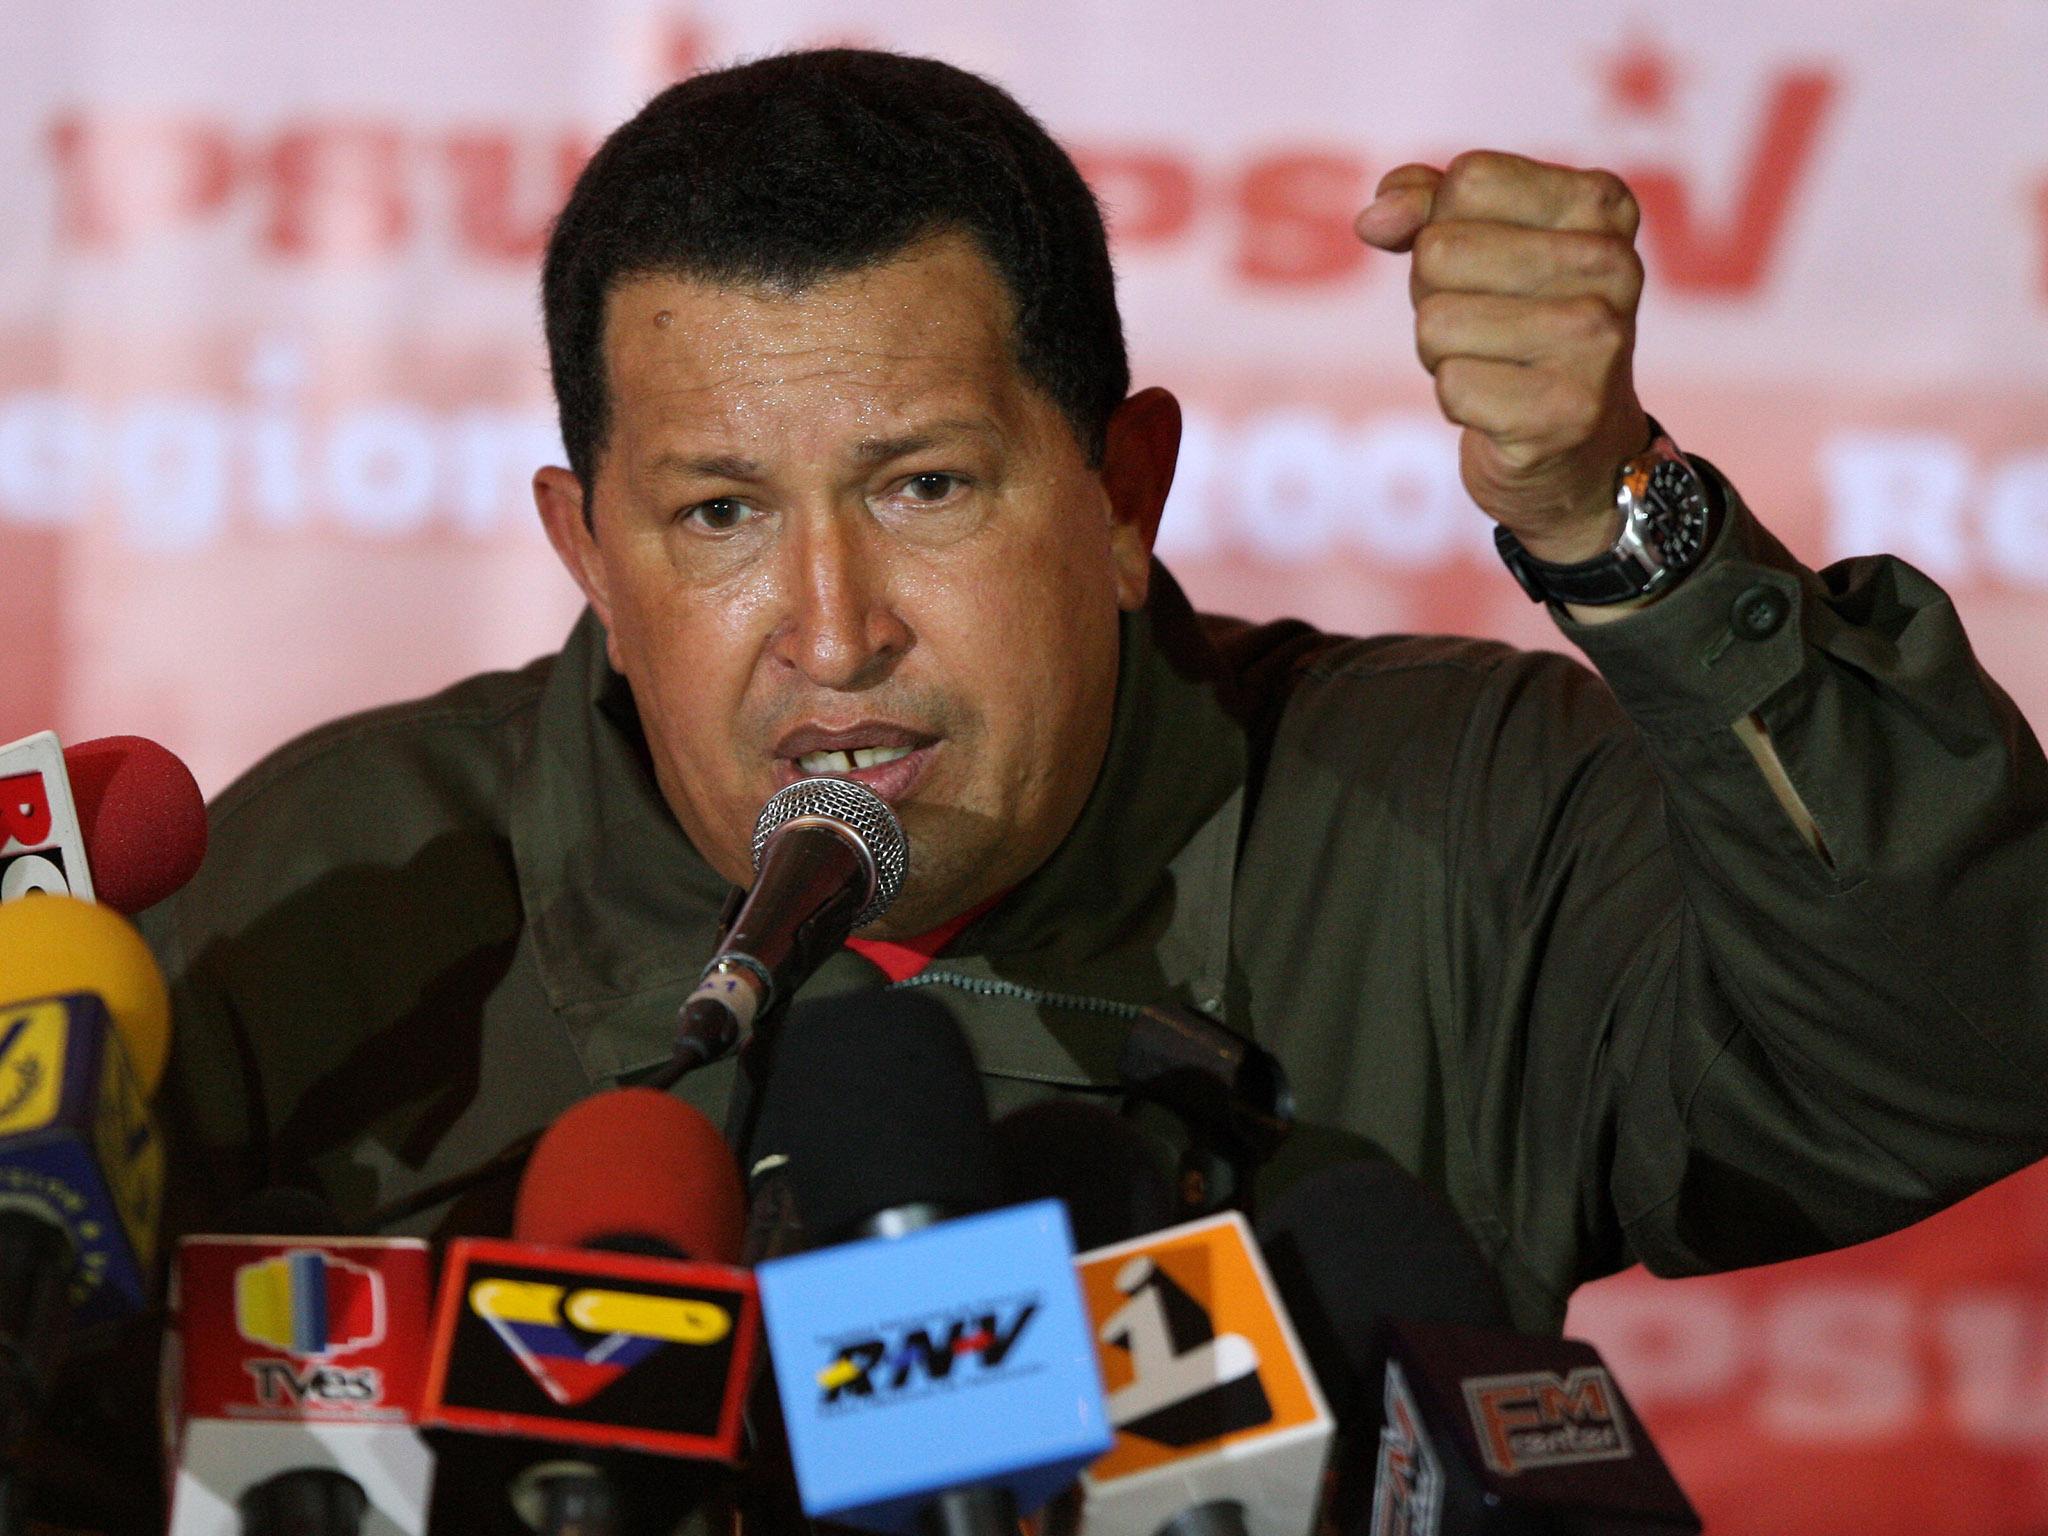 Mystery still surrounds the death of Chavez